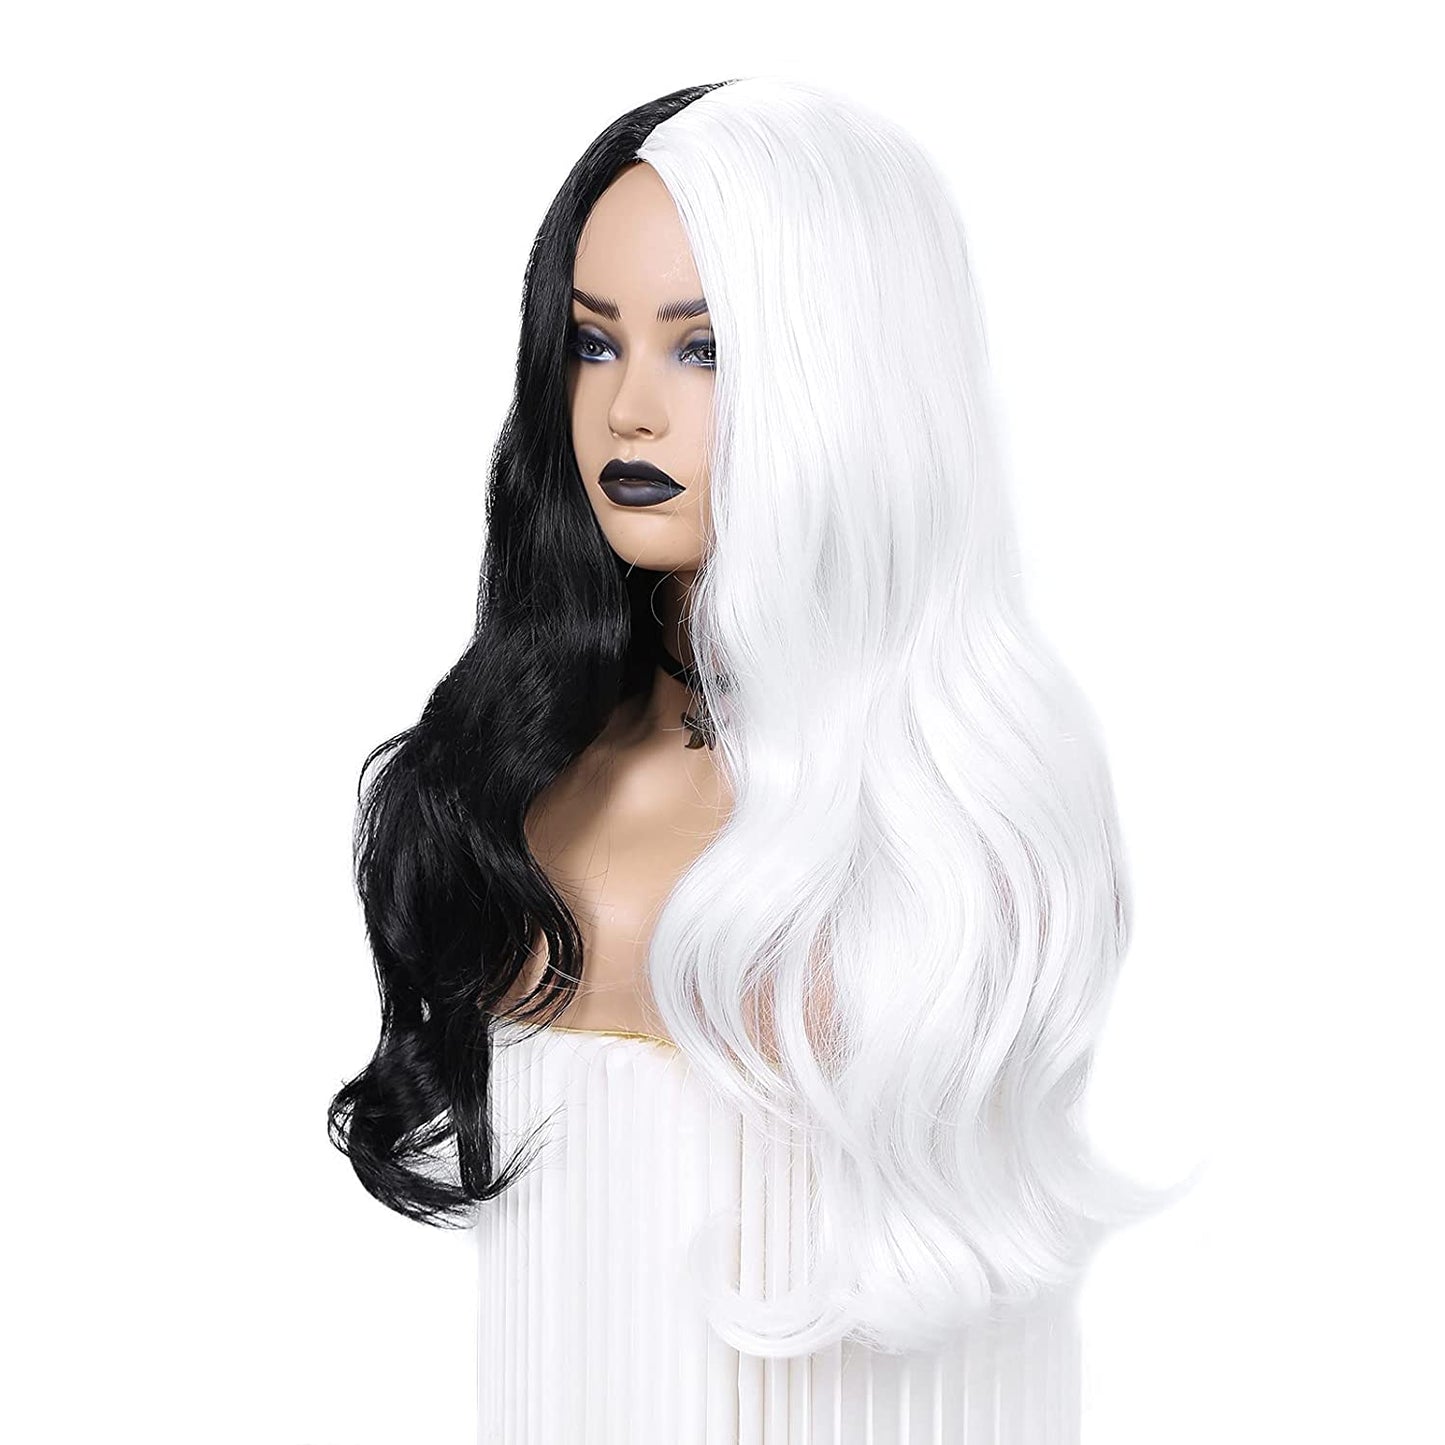 Half Black Half White Long Curly Wavy Wigs Synthetic Long wavy Wig Daily Party Cosplay Wigs